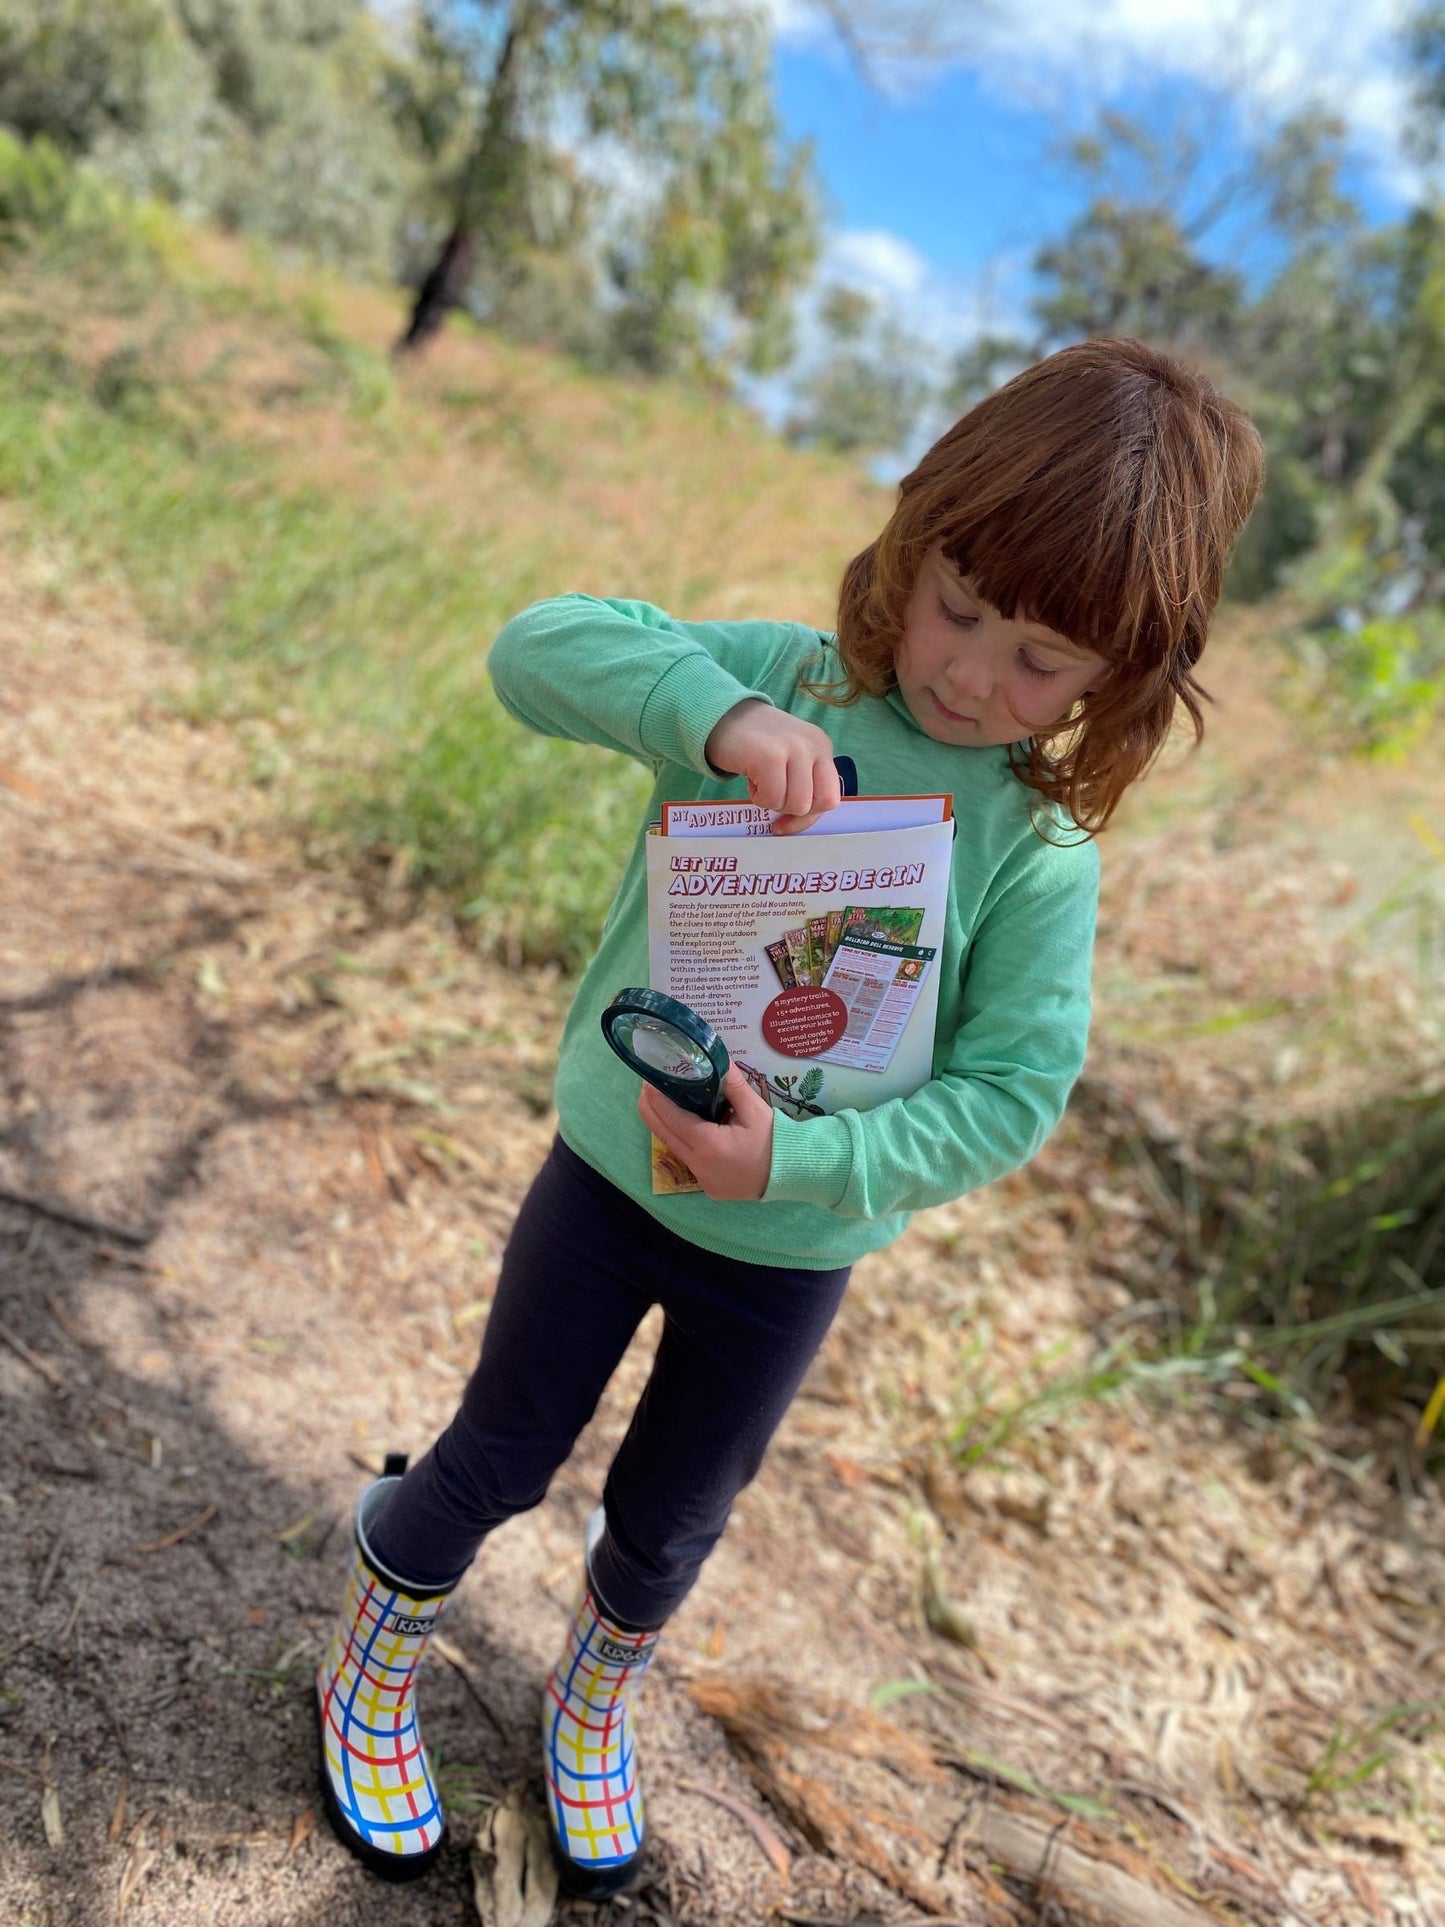 Child reaching into Adventure Guides